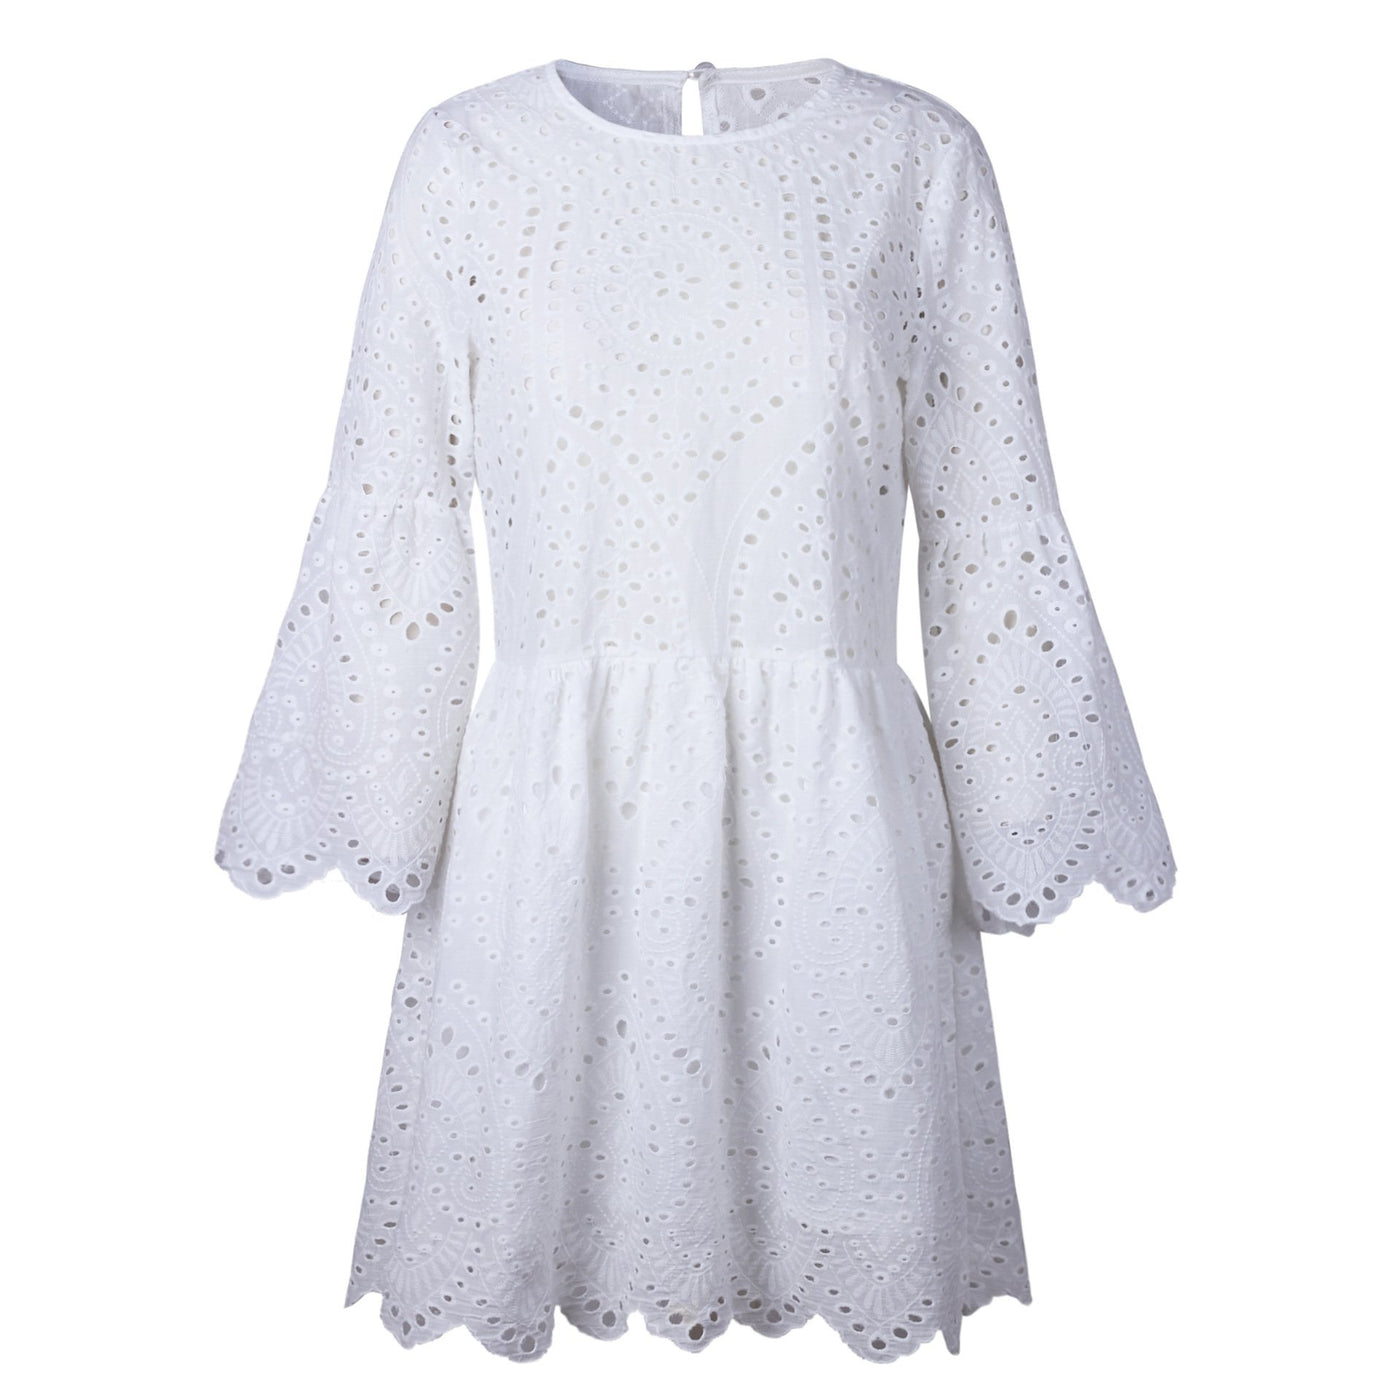 Embroidery Hollow Out Mini Dress